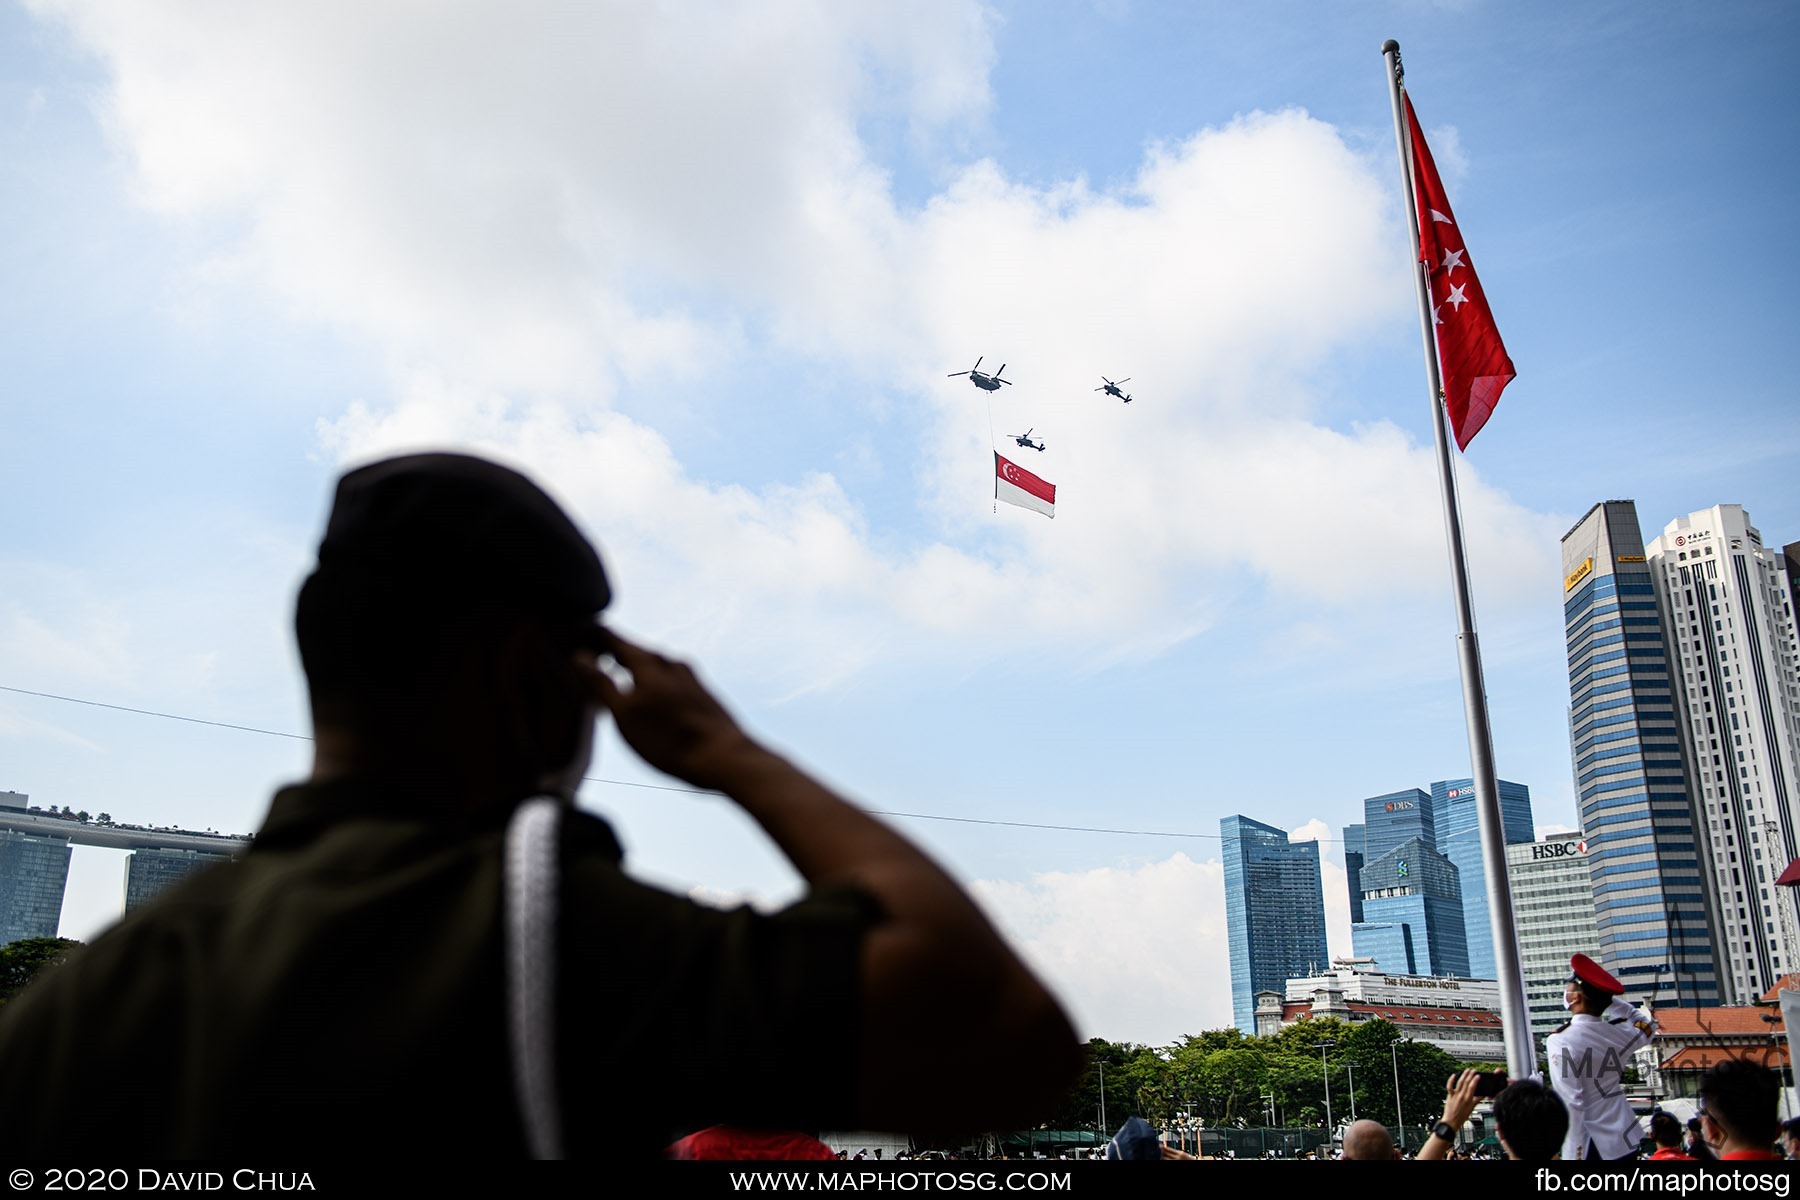 National Anthem moment at Padang as the State Flag flies over the parade.